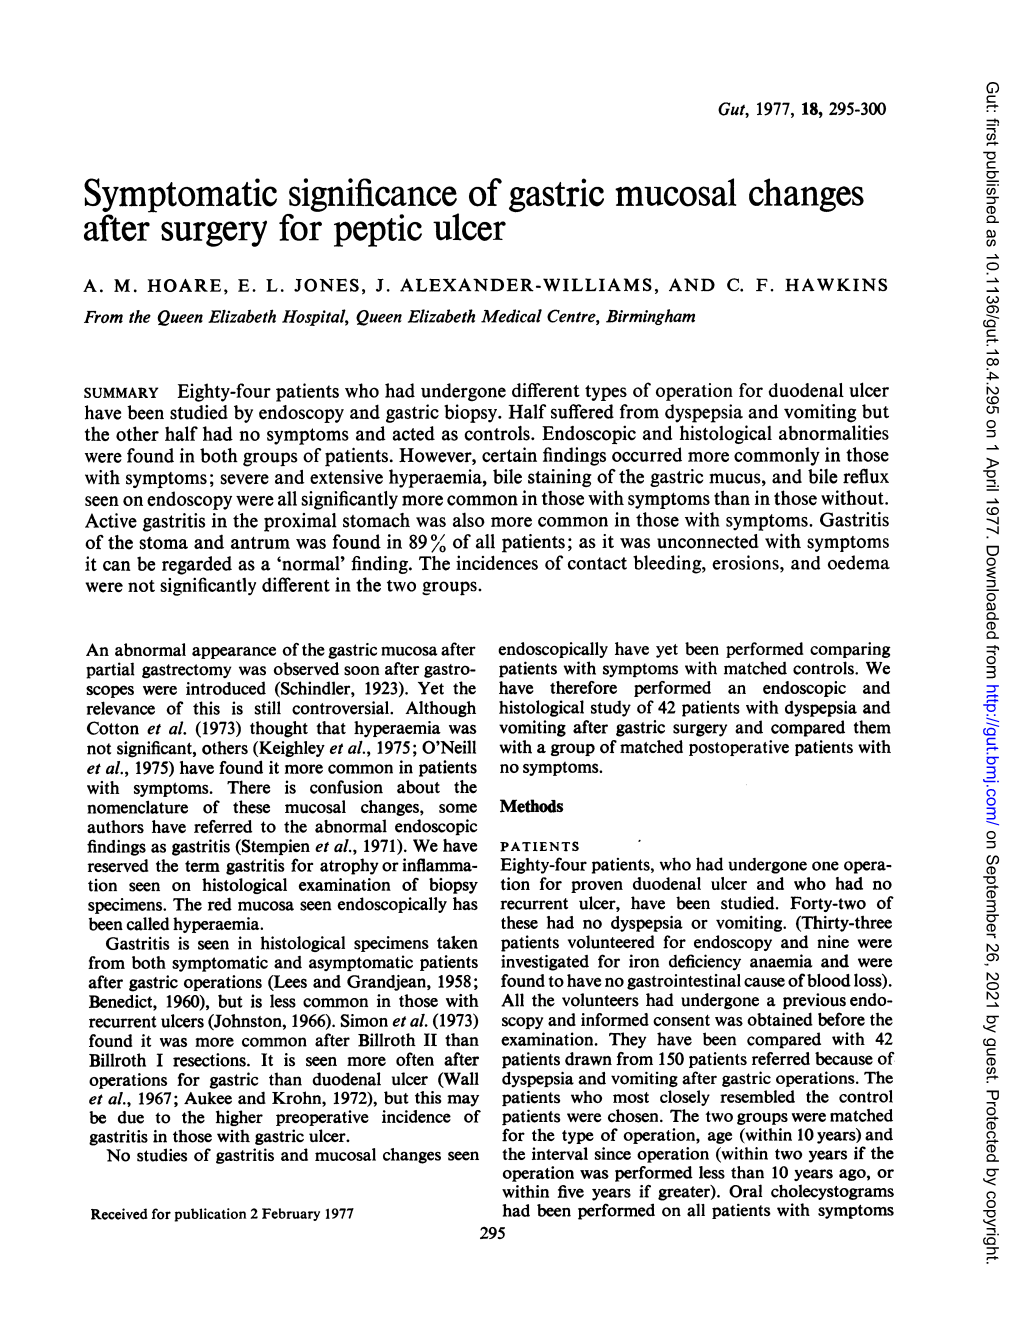 Symptomatic Significance of Gastric Mucosal Changes After Surgery for Peptic Ulcer